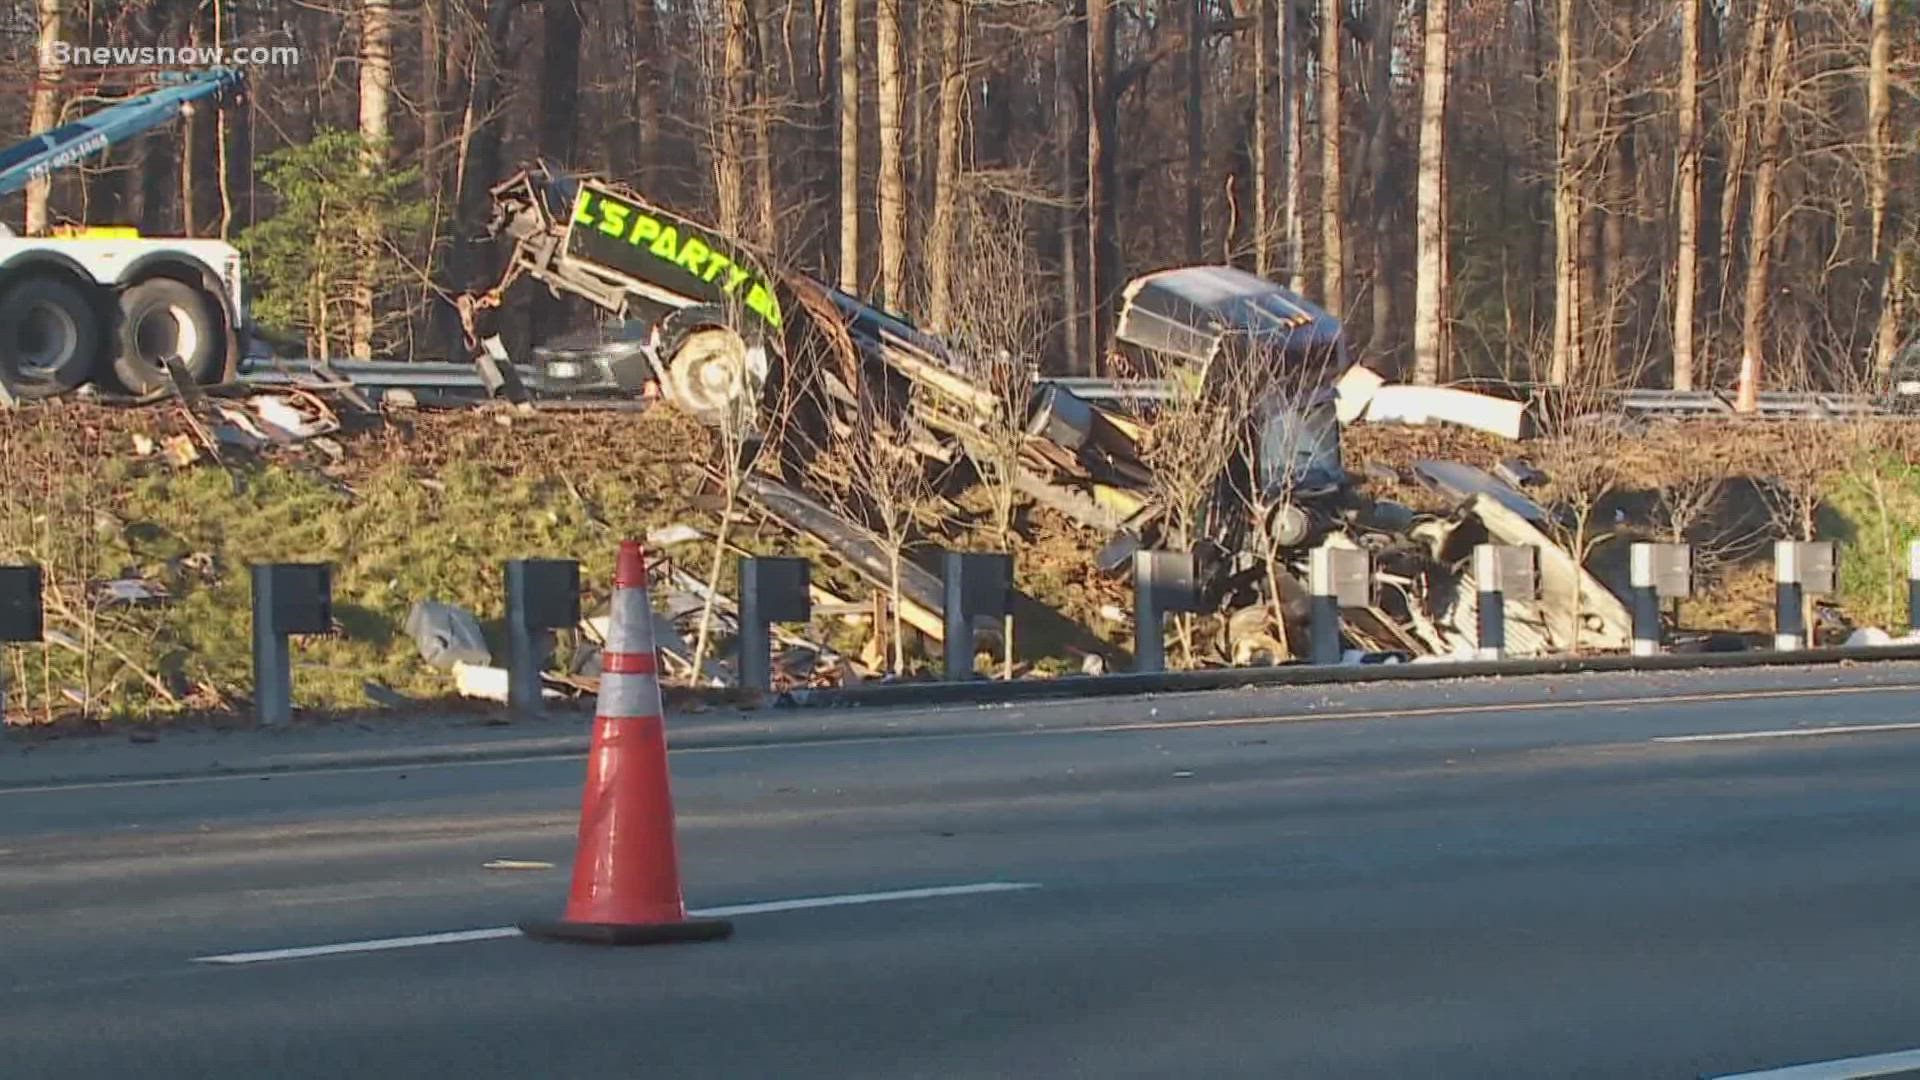 The Virginia State Police is still working to confirm the identities of two men and a woman who died in the crash. They were passengers on the bus.